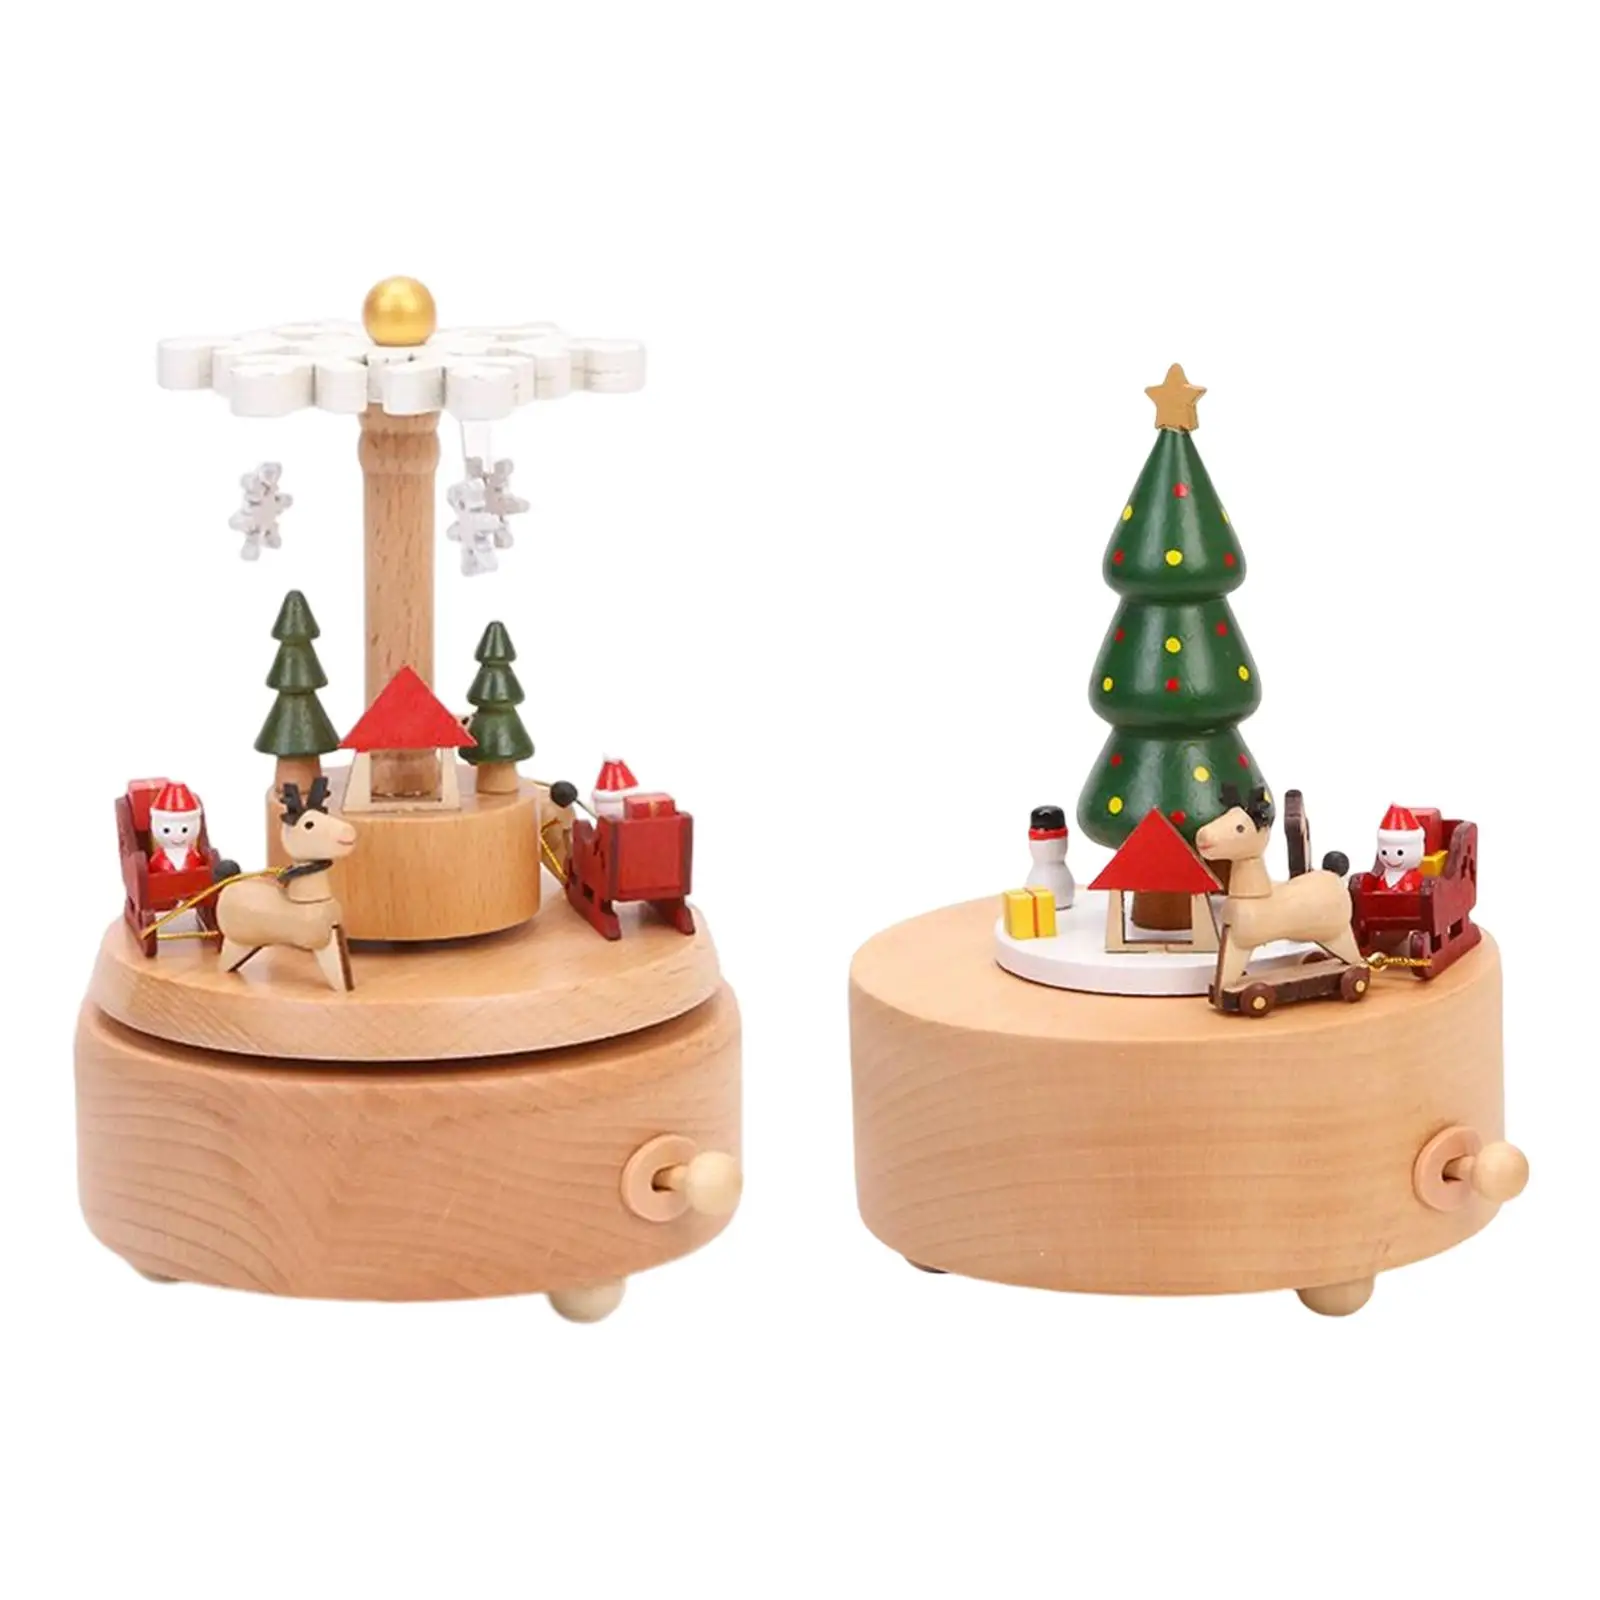 Creative Christmas Music Box Rotating Musical Box Carousel Toy Crafts for Indoor Desktop Decor Ornament Birthday Gift